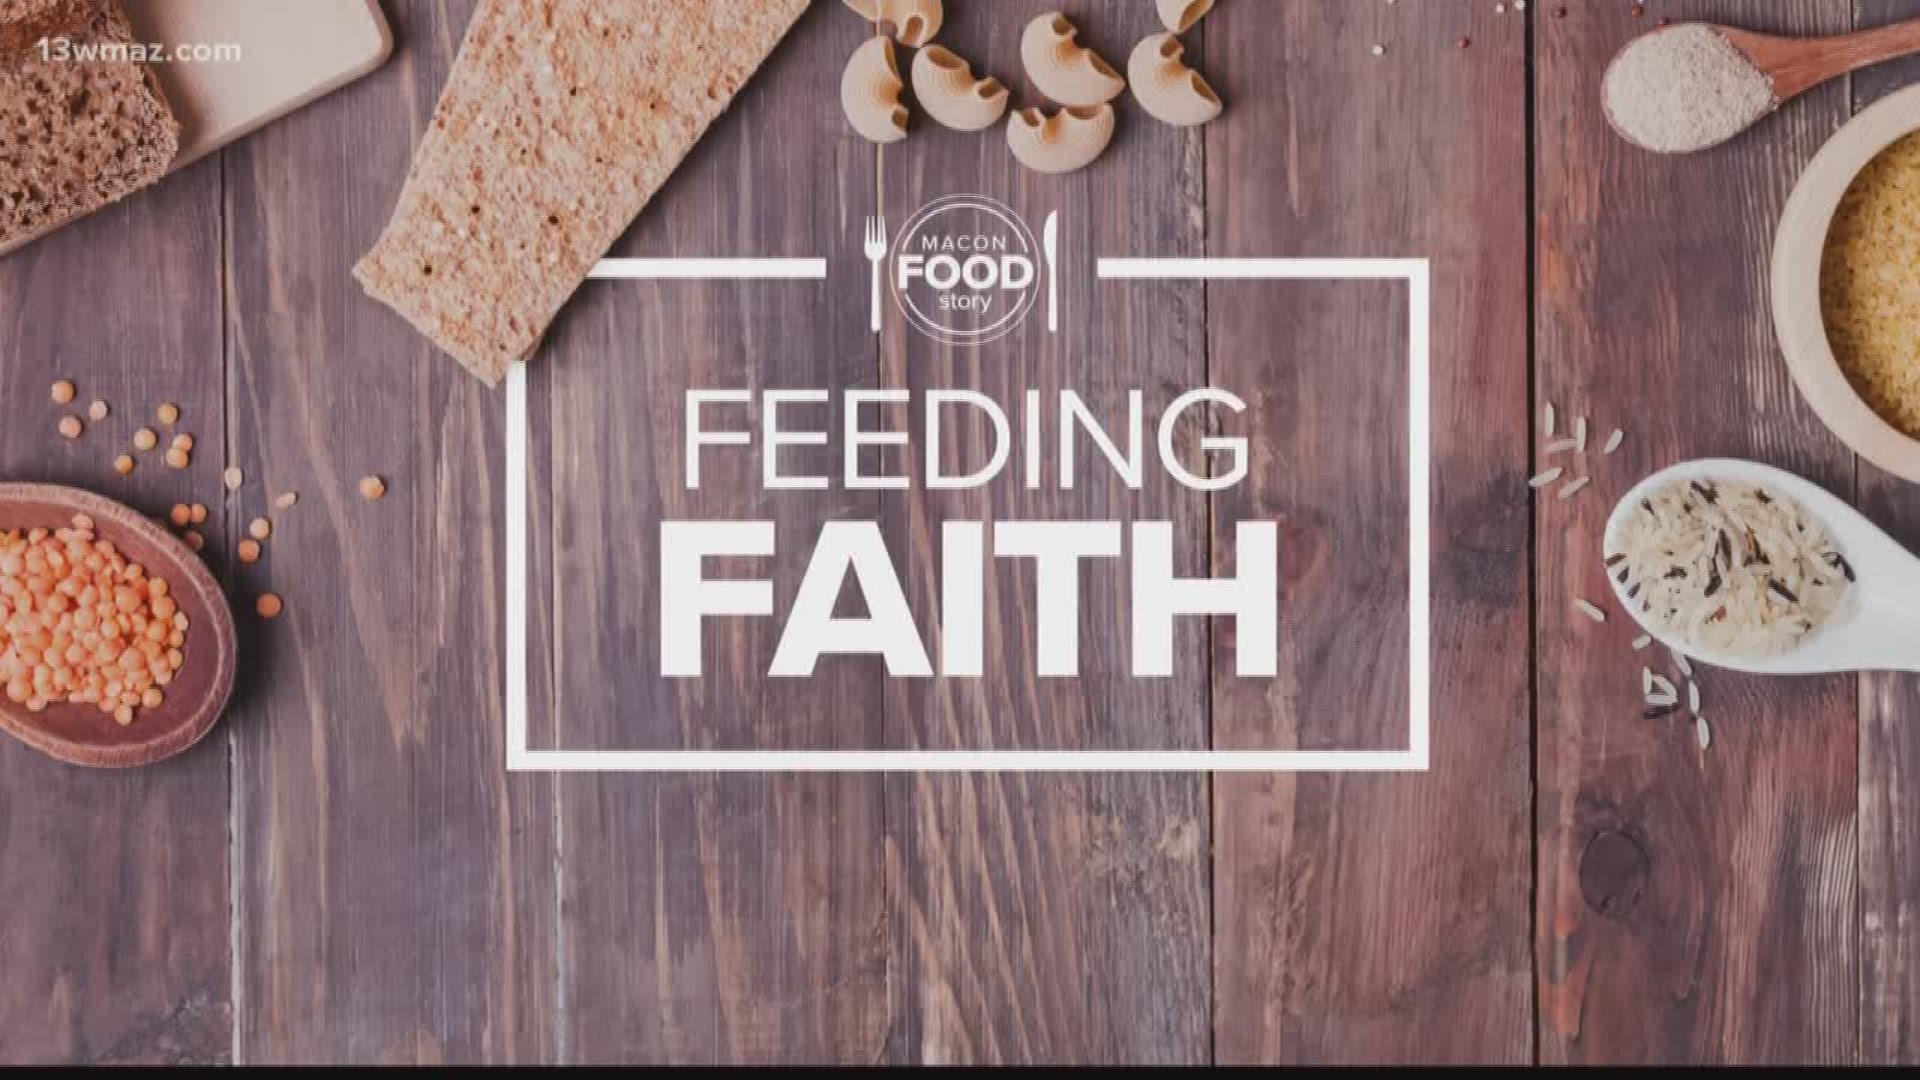 Every Wednesday morning in February, the Macon Food Story will take you inside several houses of worship where the connection created by sharing a meal builds relationships.